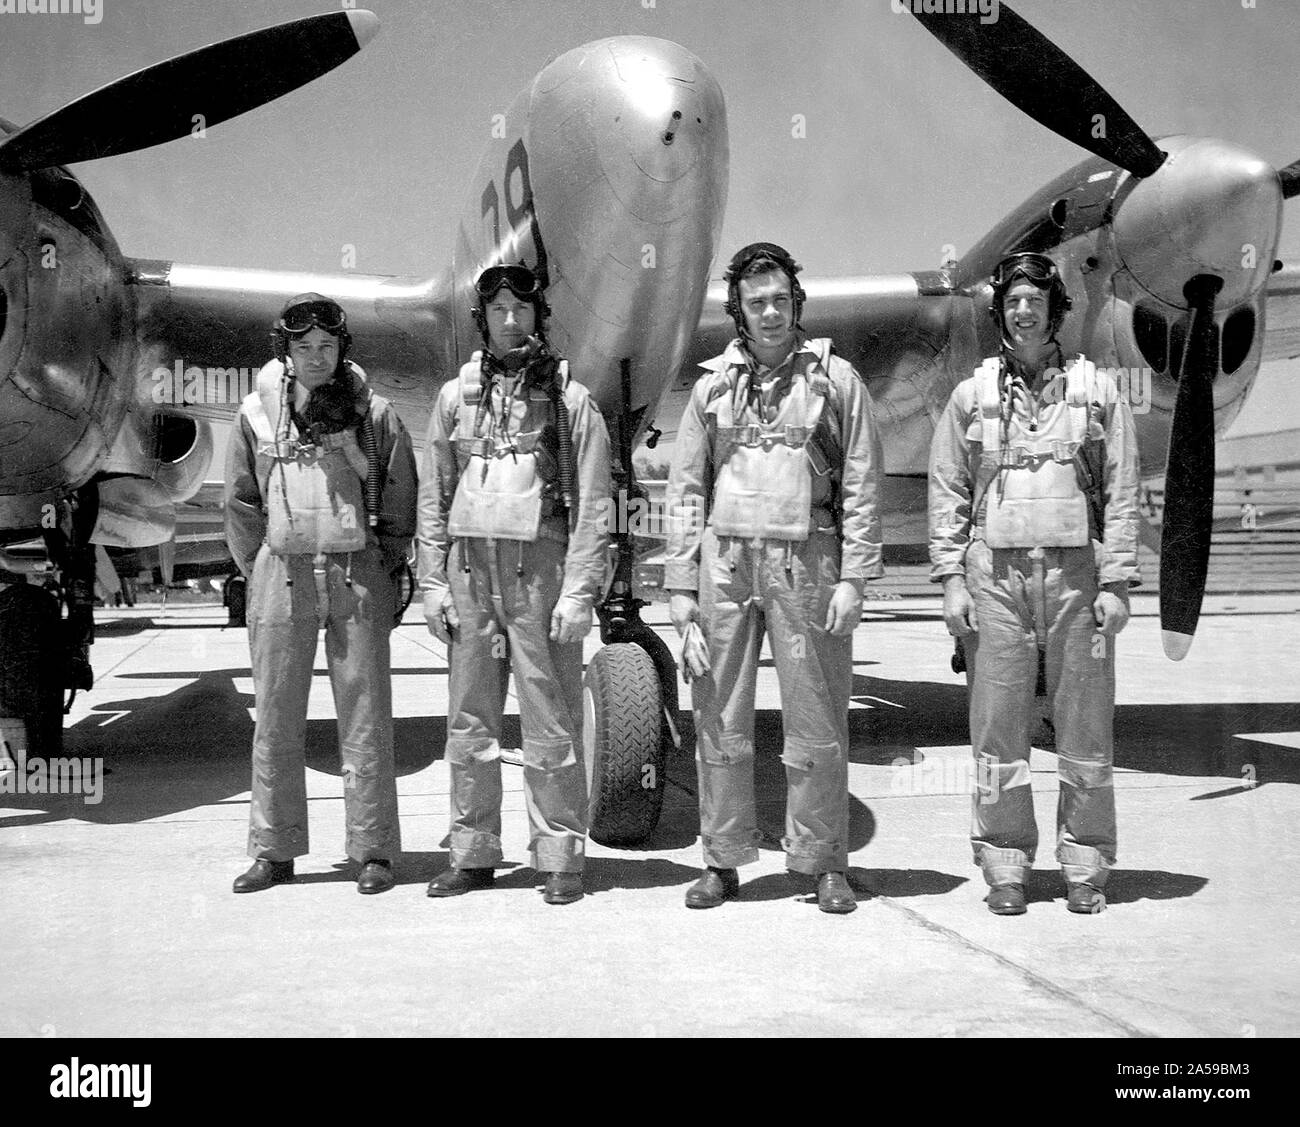 The Aircraft Engine Research Laboratory’s pilot corps during the final days of World War II: from left to right, Joseph Vensel, Howard Lilly, William Swann, and Joseph Walker. William “Eb” Gough joined the group months after this photograph. These men were responsible for flying the various National Advisory Committee for Aeronautics (NACA) aircraft to test new engine modifications, study ice buildup, and determine fuel performance. Stock Photo